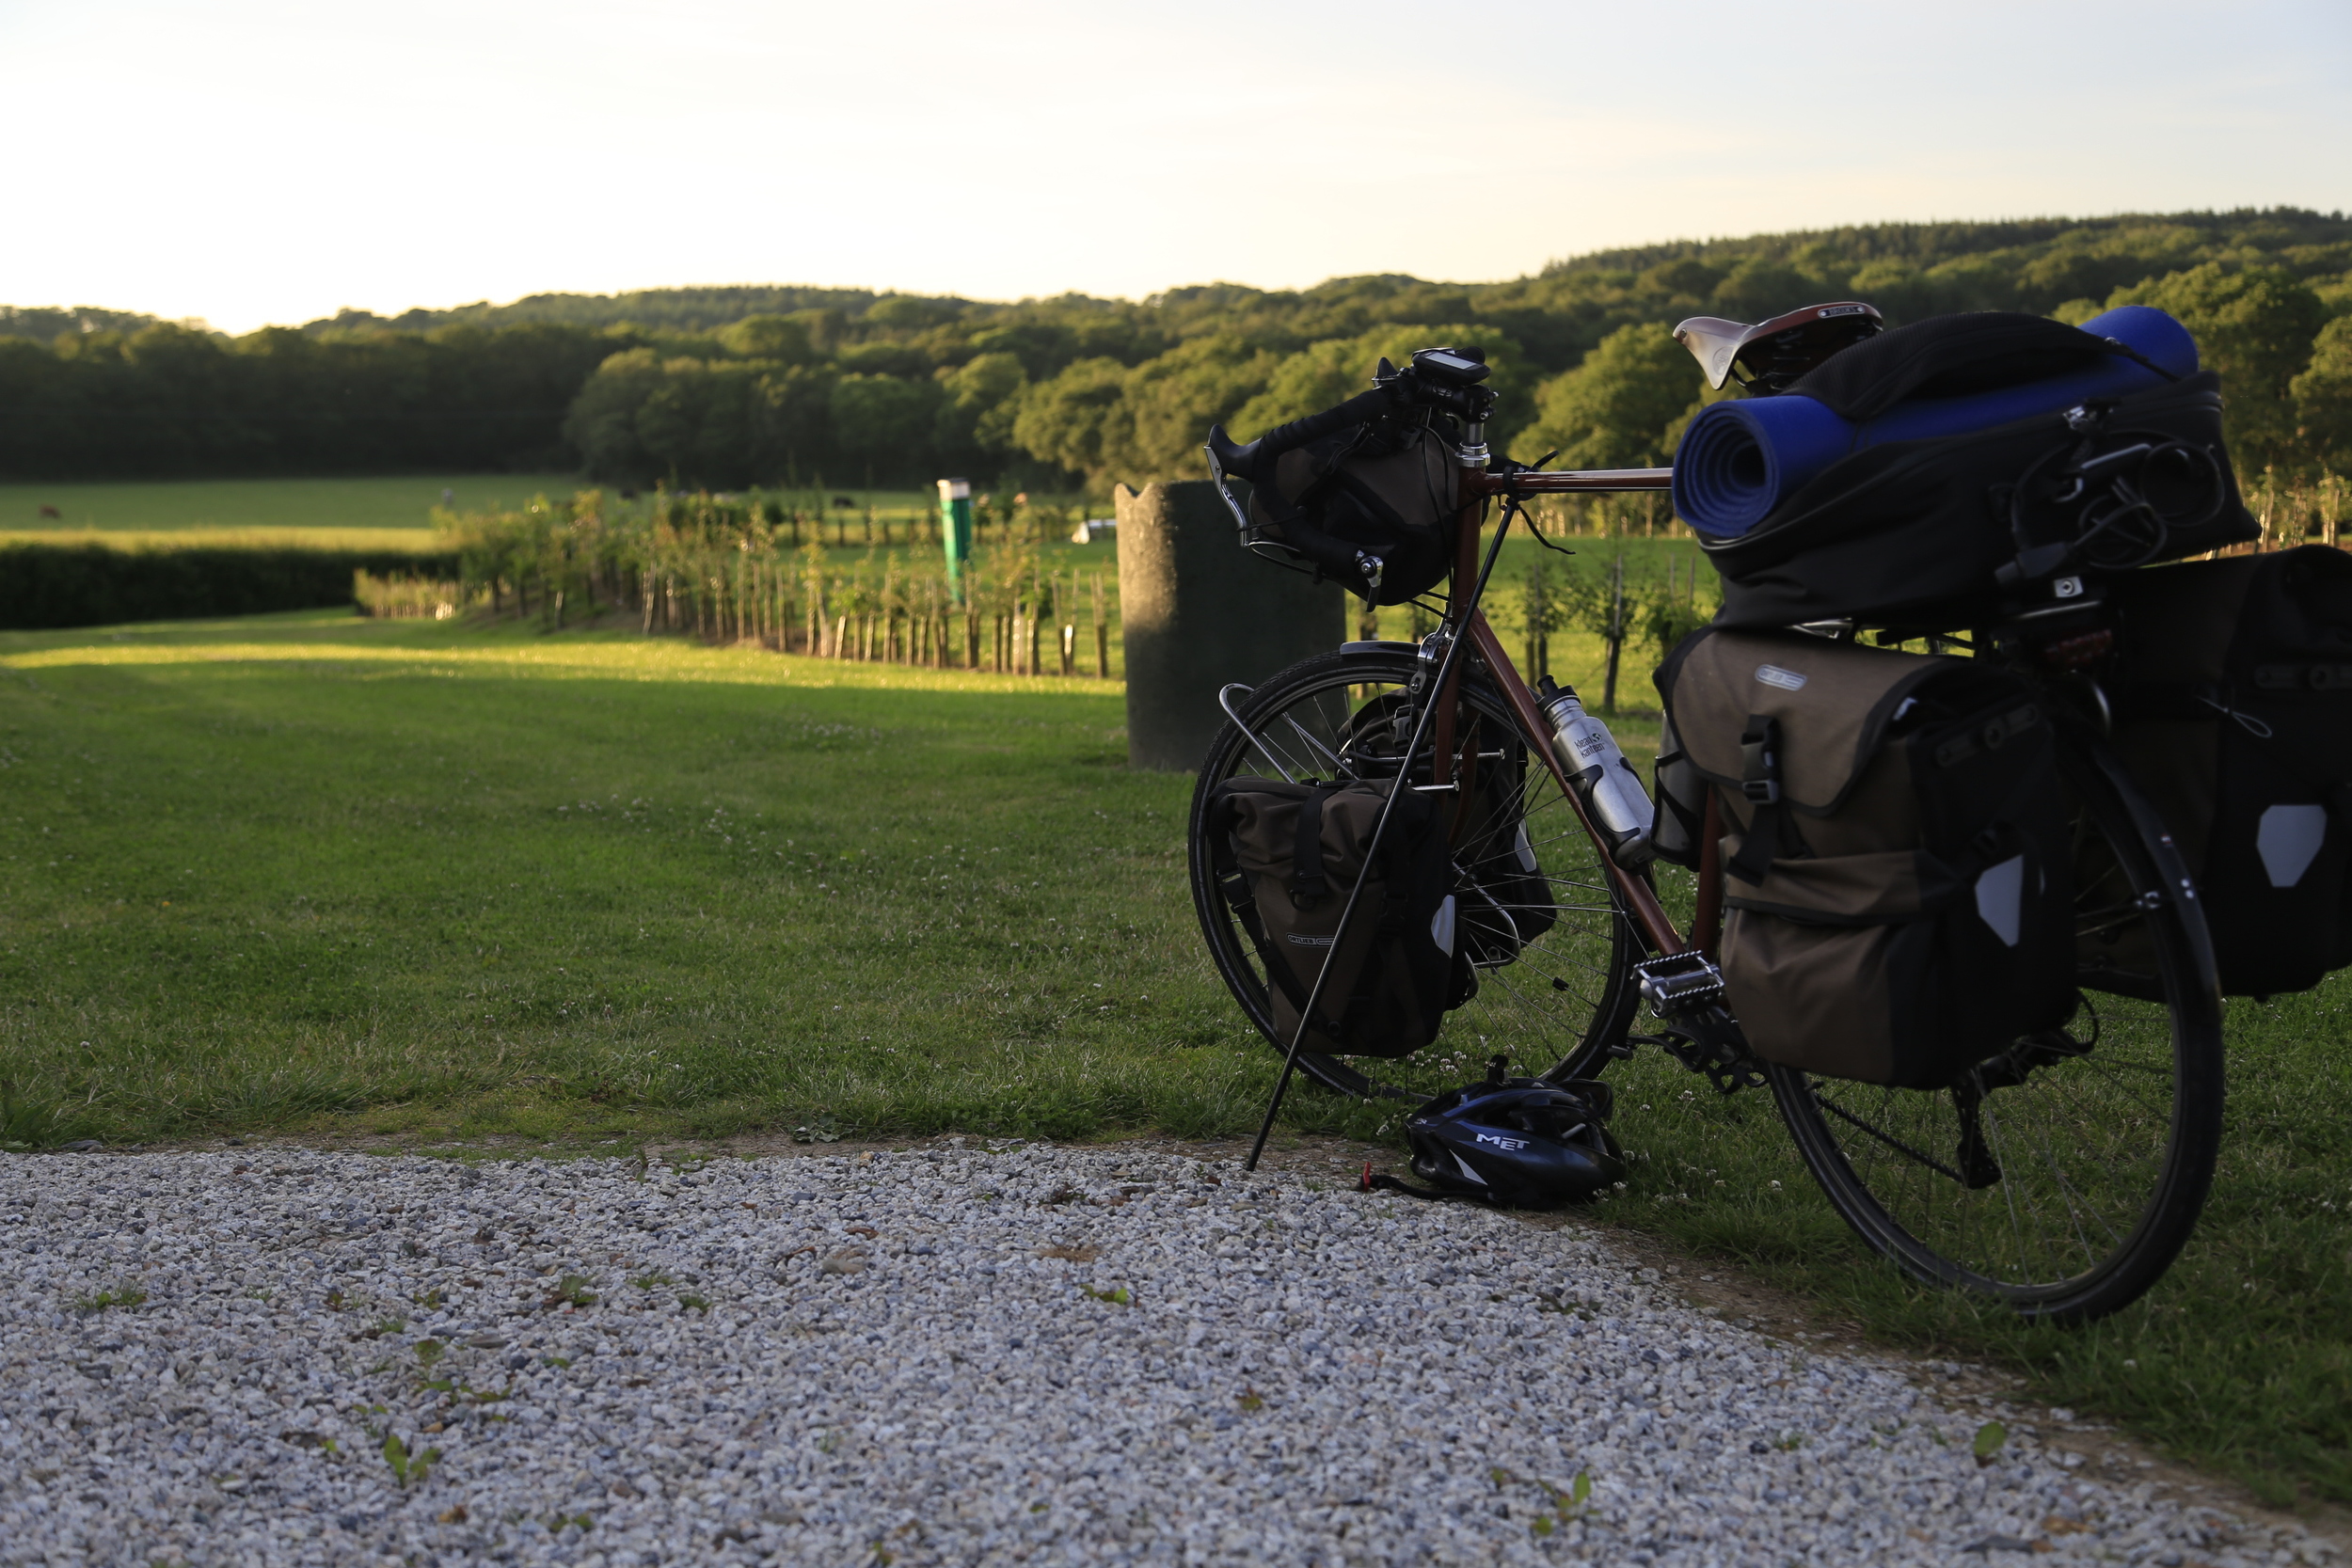 cornwall, dorset, cycle touring, bike touring, nature, wild, camping, hilleberg, hiking, lost, forest, fire, camp, swiss army, leatherman, sleeping bag, escape, scenery, tent, stove, MSR,  